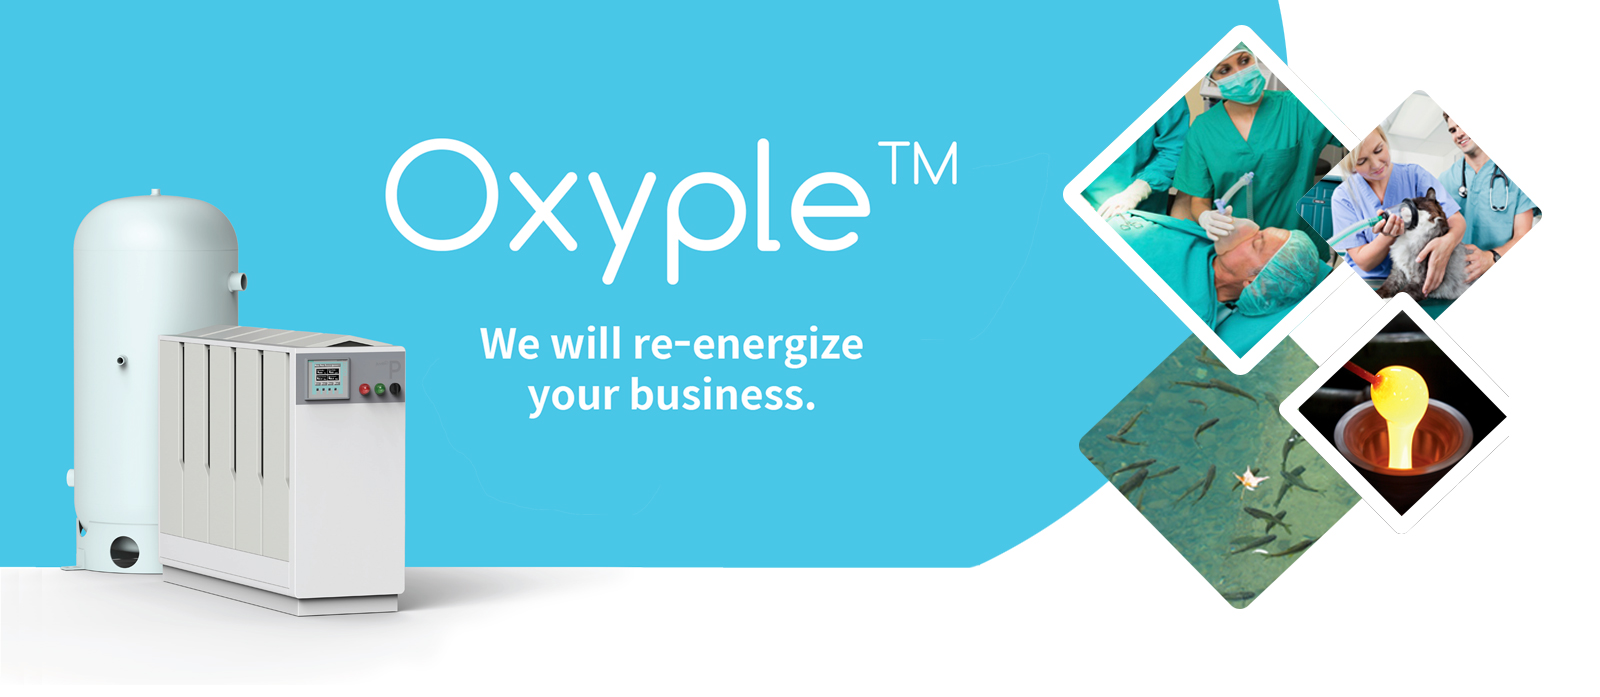 oxygen-concentrator oxyple we will re energize your business